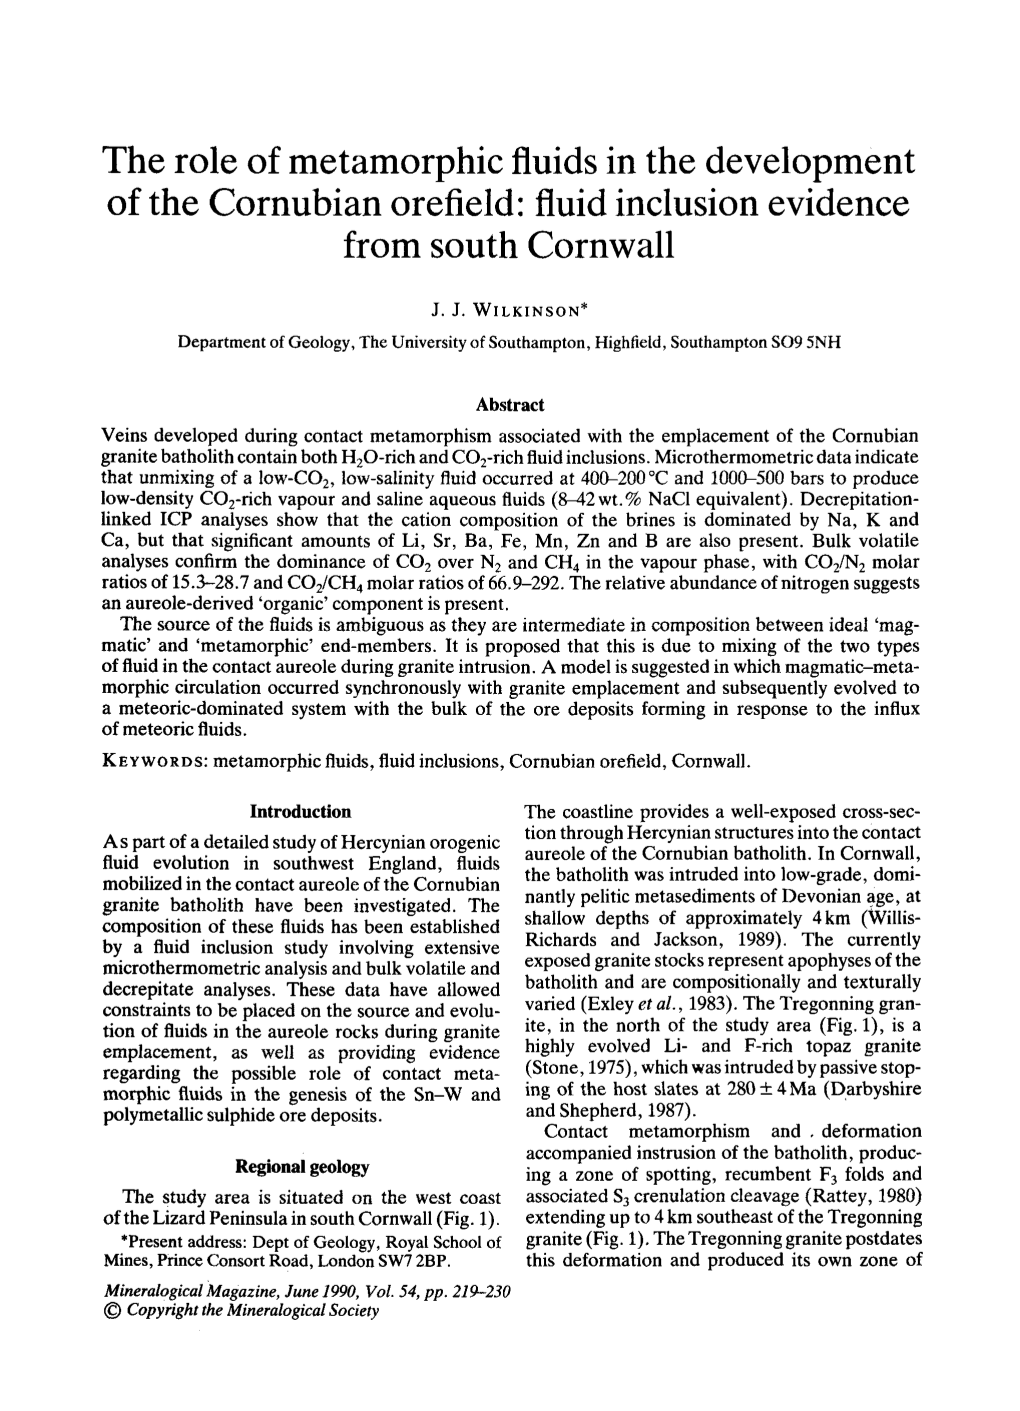 Fluid Inclusion Evidence from South Cornwall